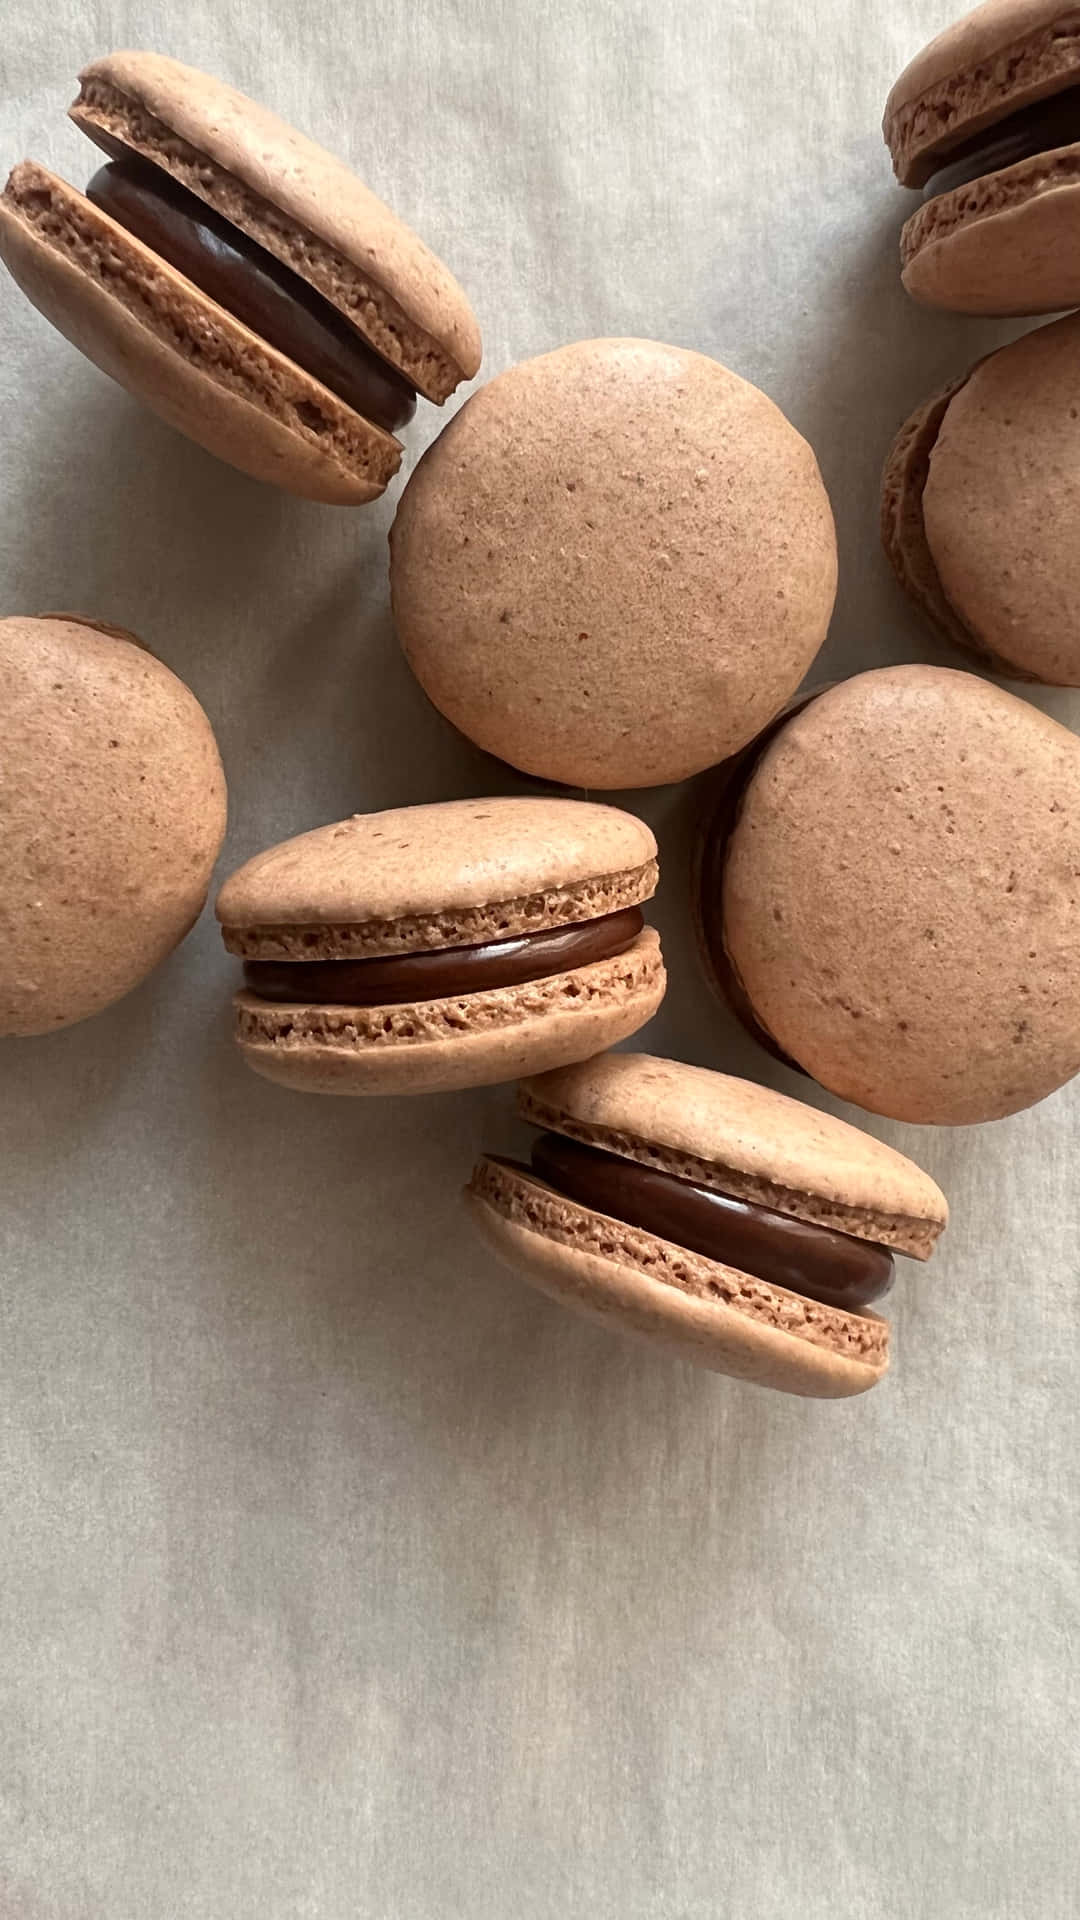 Chocolate French Macaron With Chocolate Filling Wallpaper